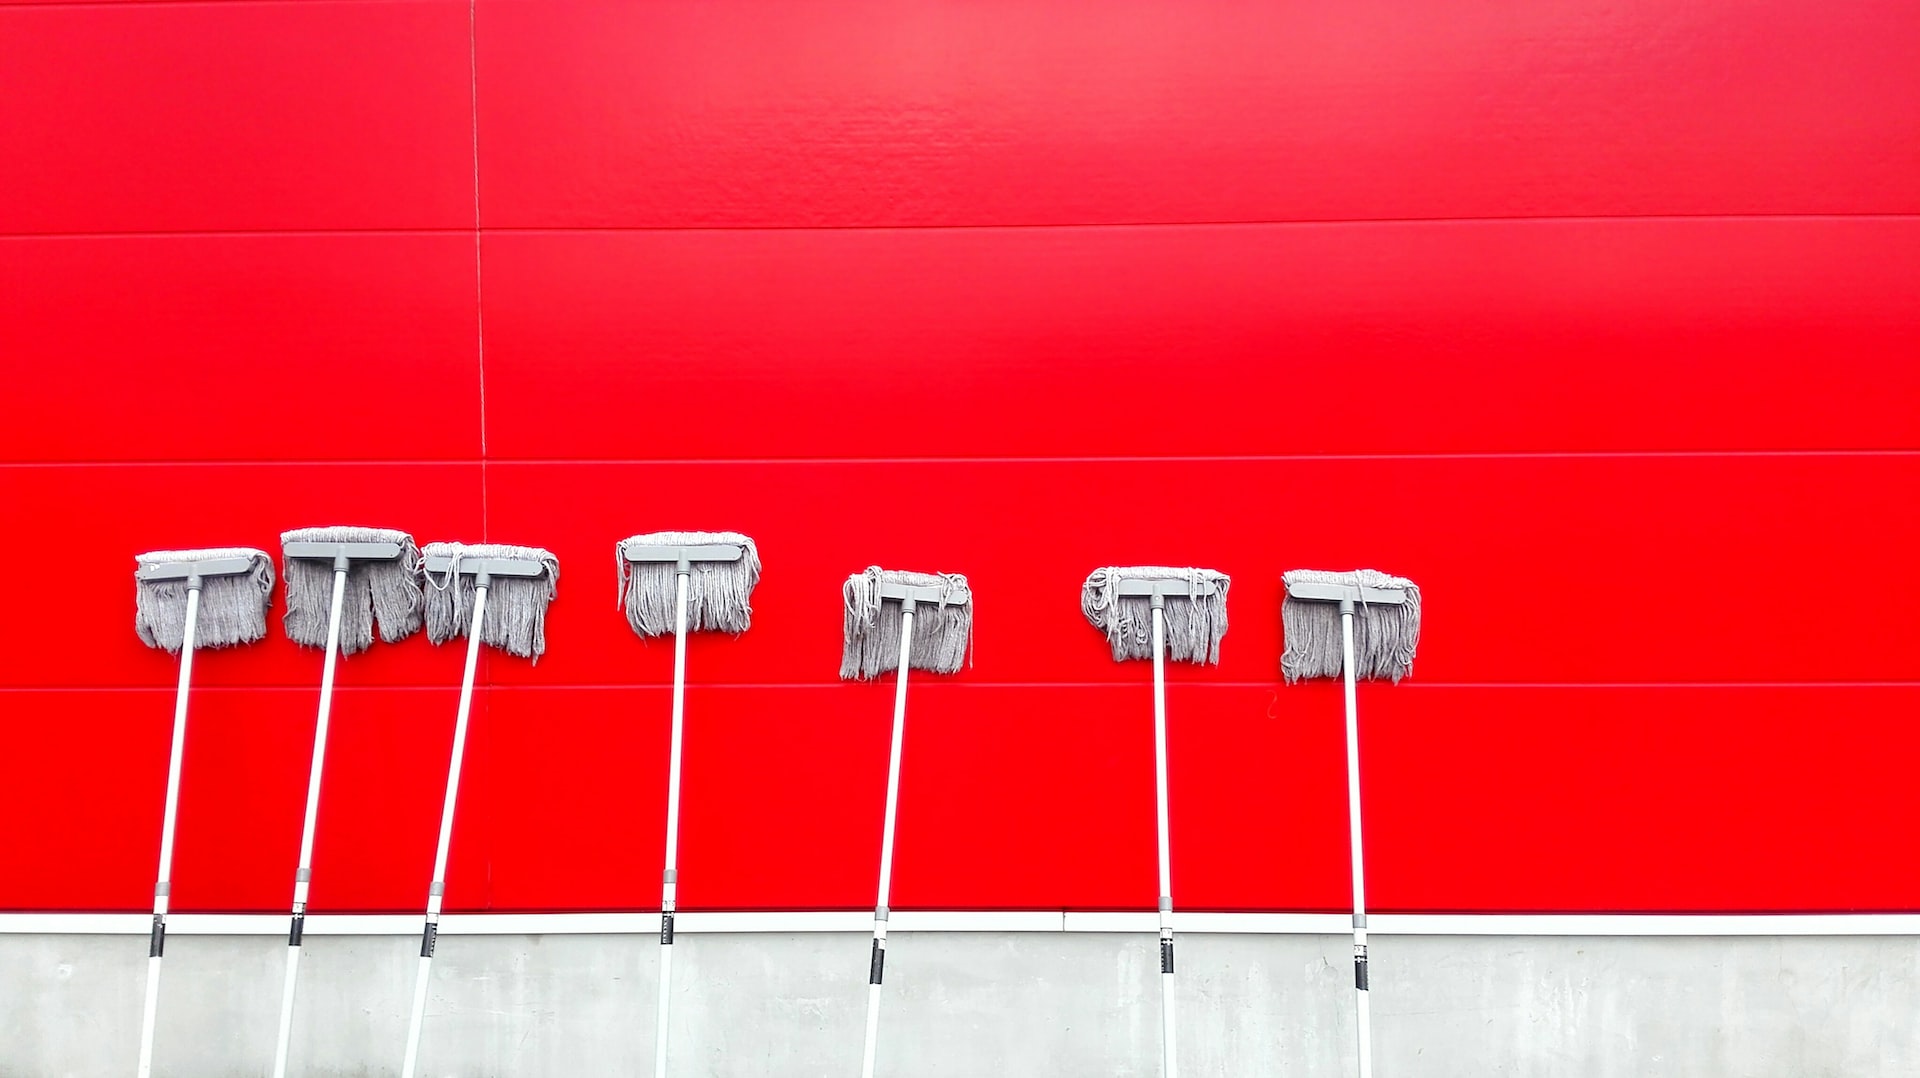 White mops against red and white wall